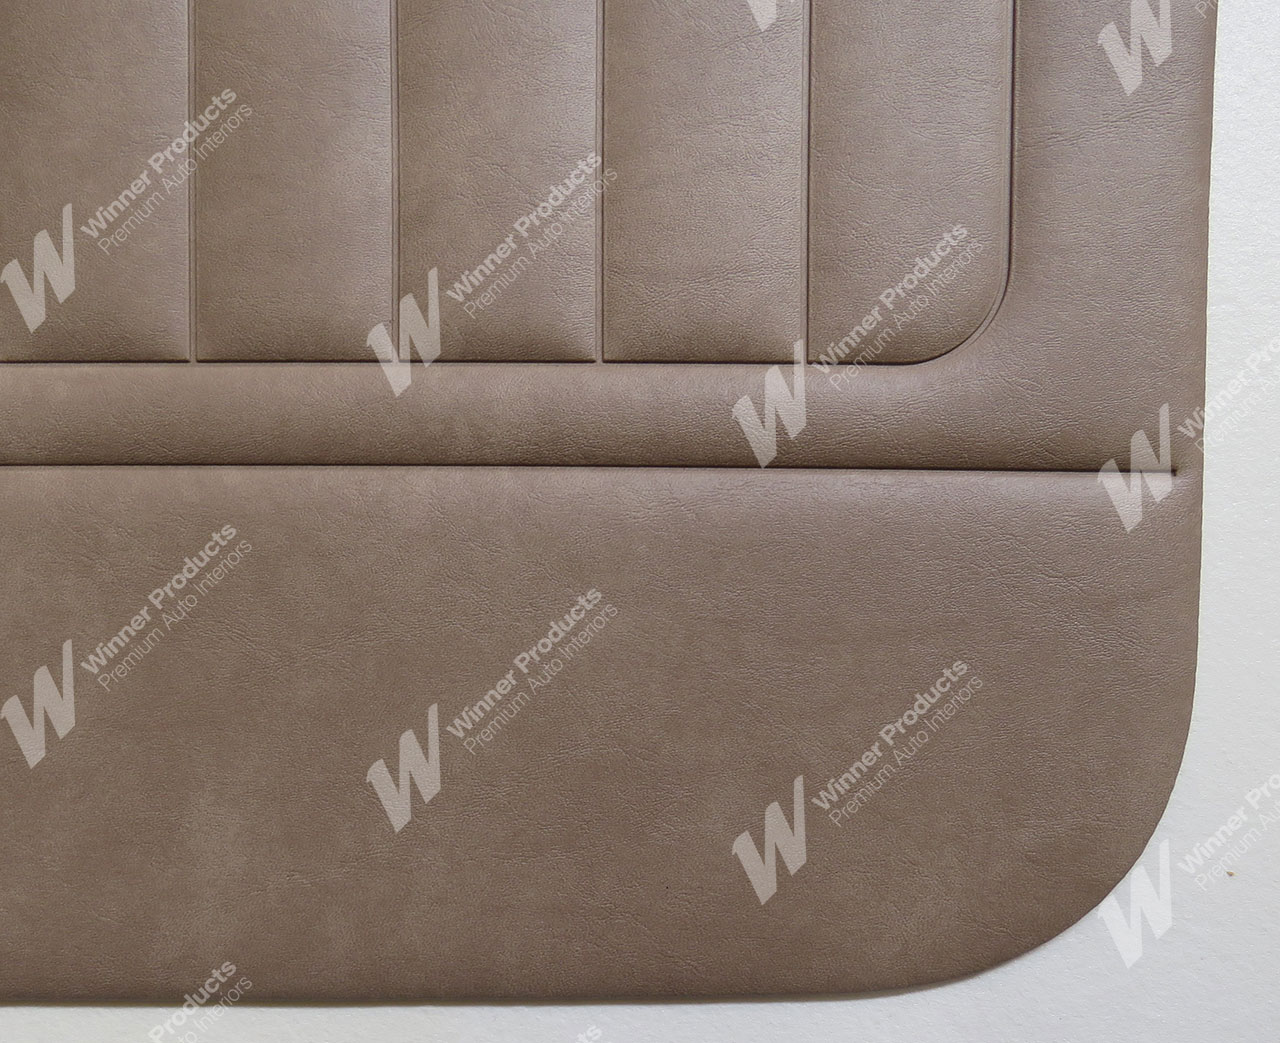 Holden Kingswood WB Kingswood Ute 64X Light Oyster & Cloth Door Trims (Image 3 of 3)